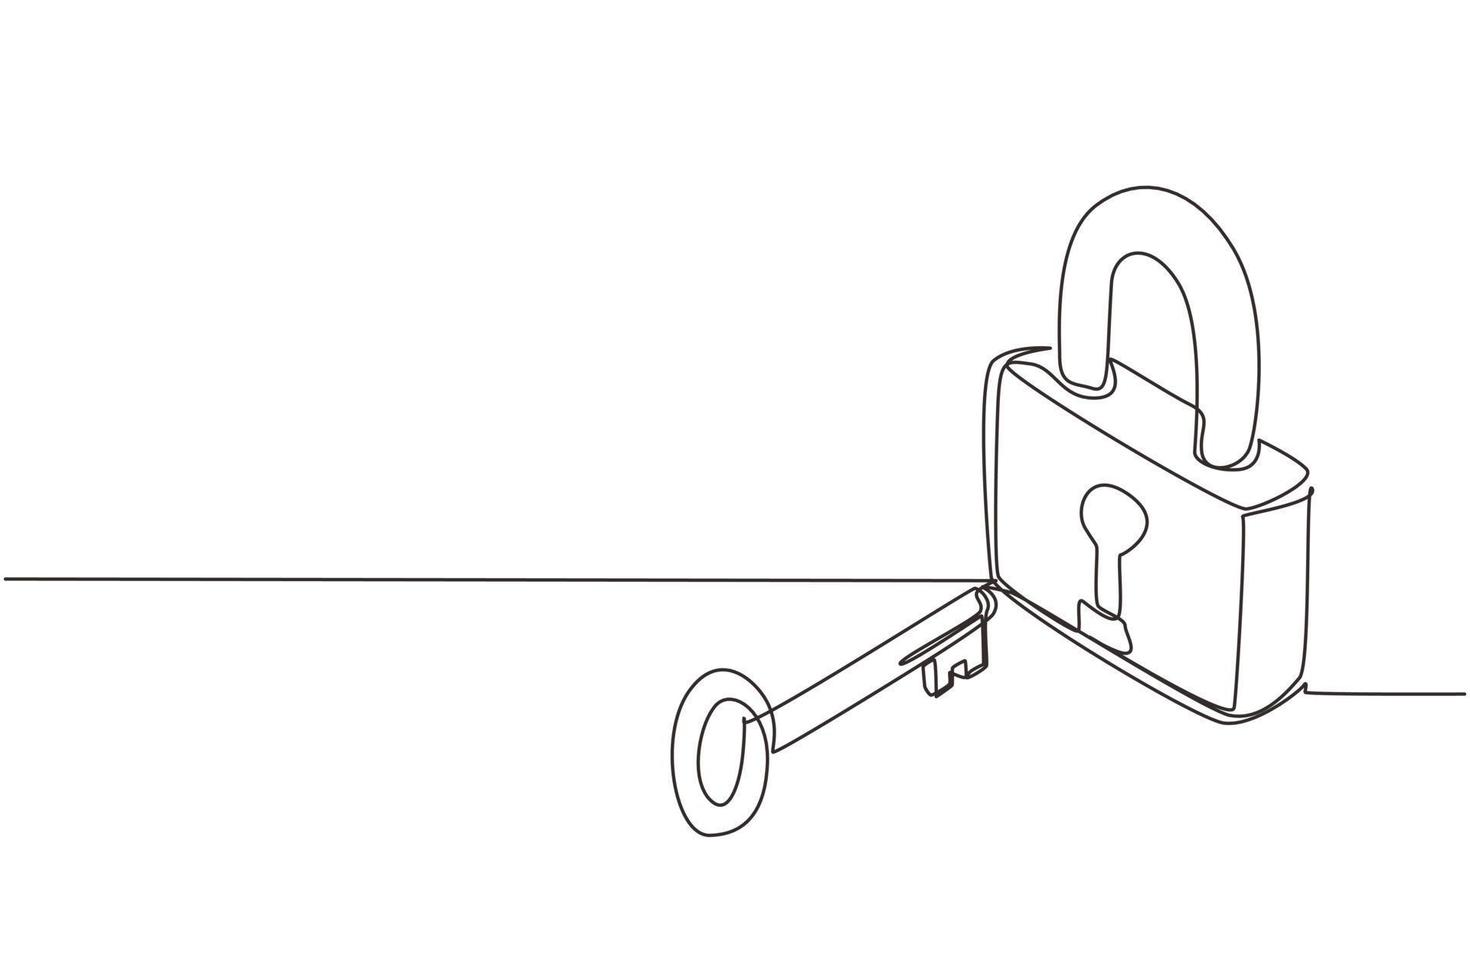 Single continuous line drawing lock and key, isometric image. Key and lock. Safety lock with key icon image. Success, solution, opportunity and safety concept. One line draw graphic design vector